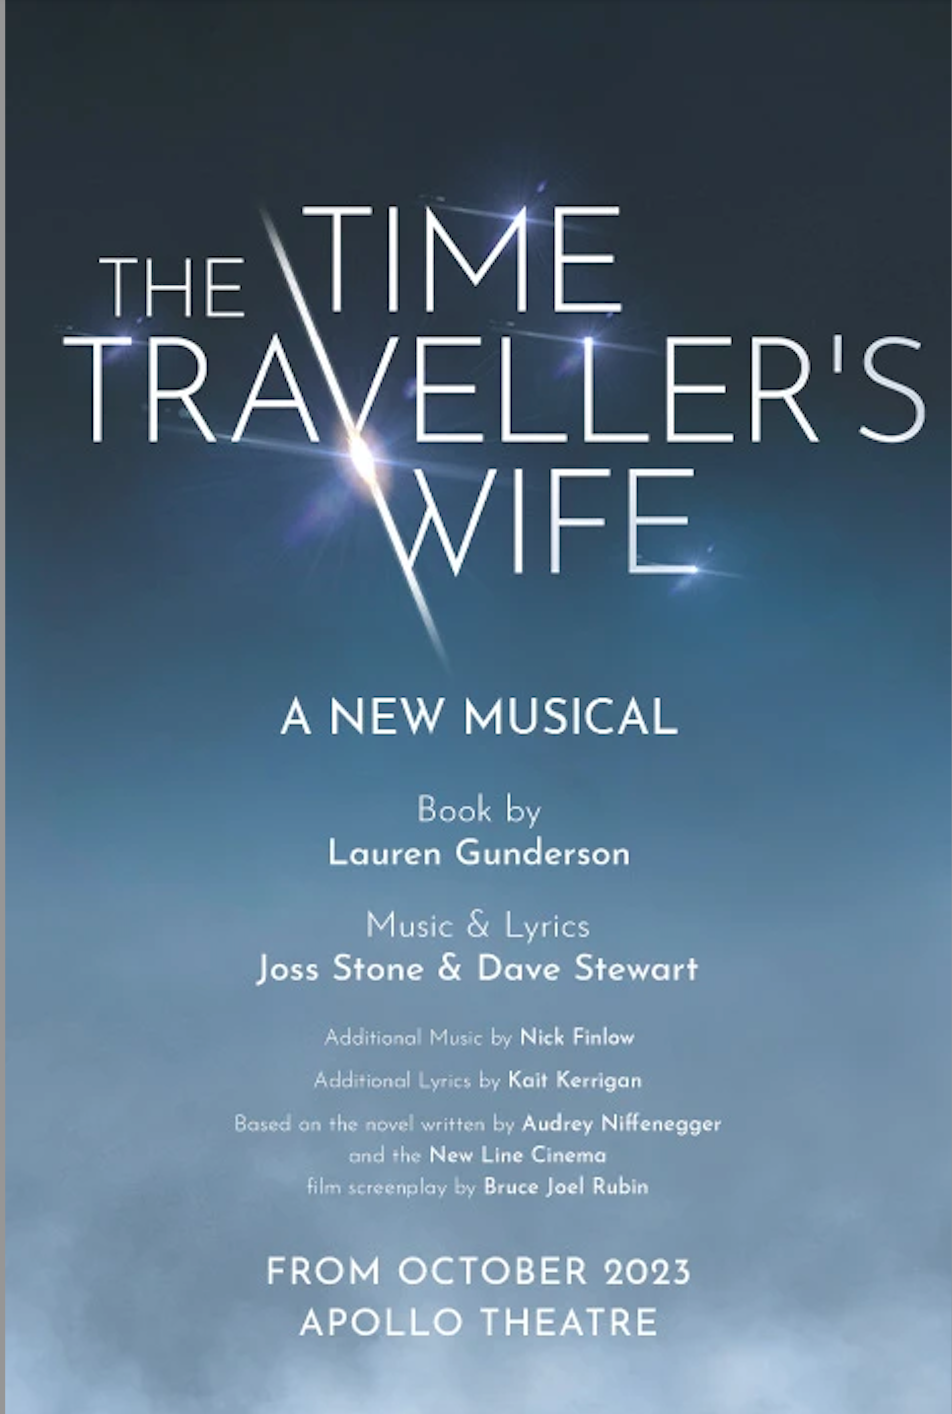 Joss Stone and Dave Stewart to pen songs for The Time Traveller's